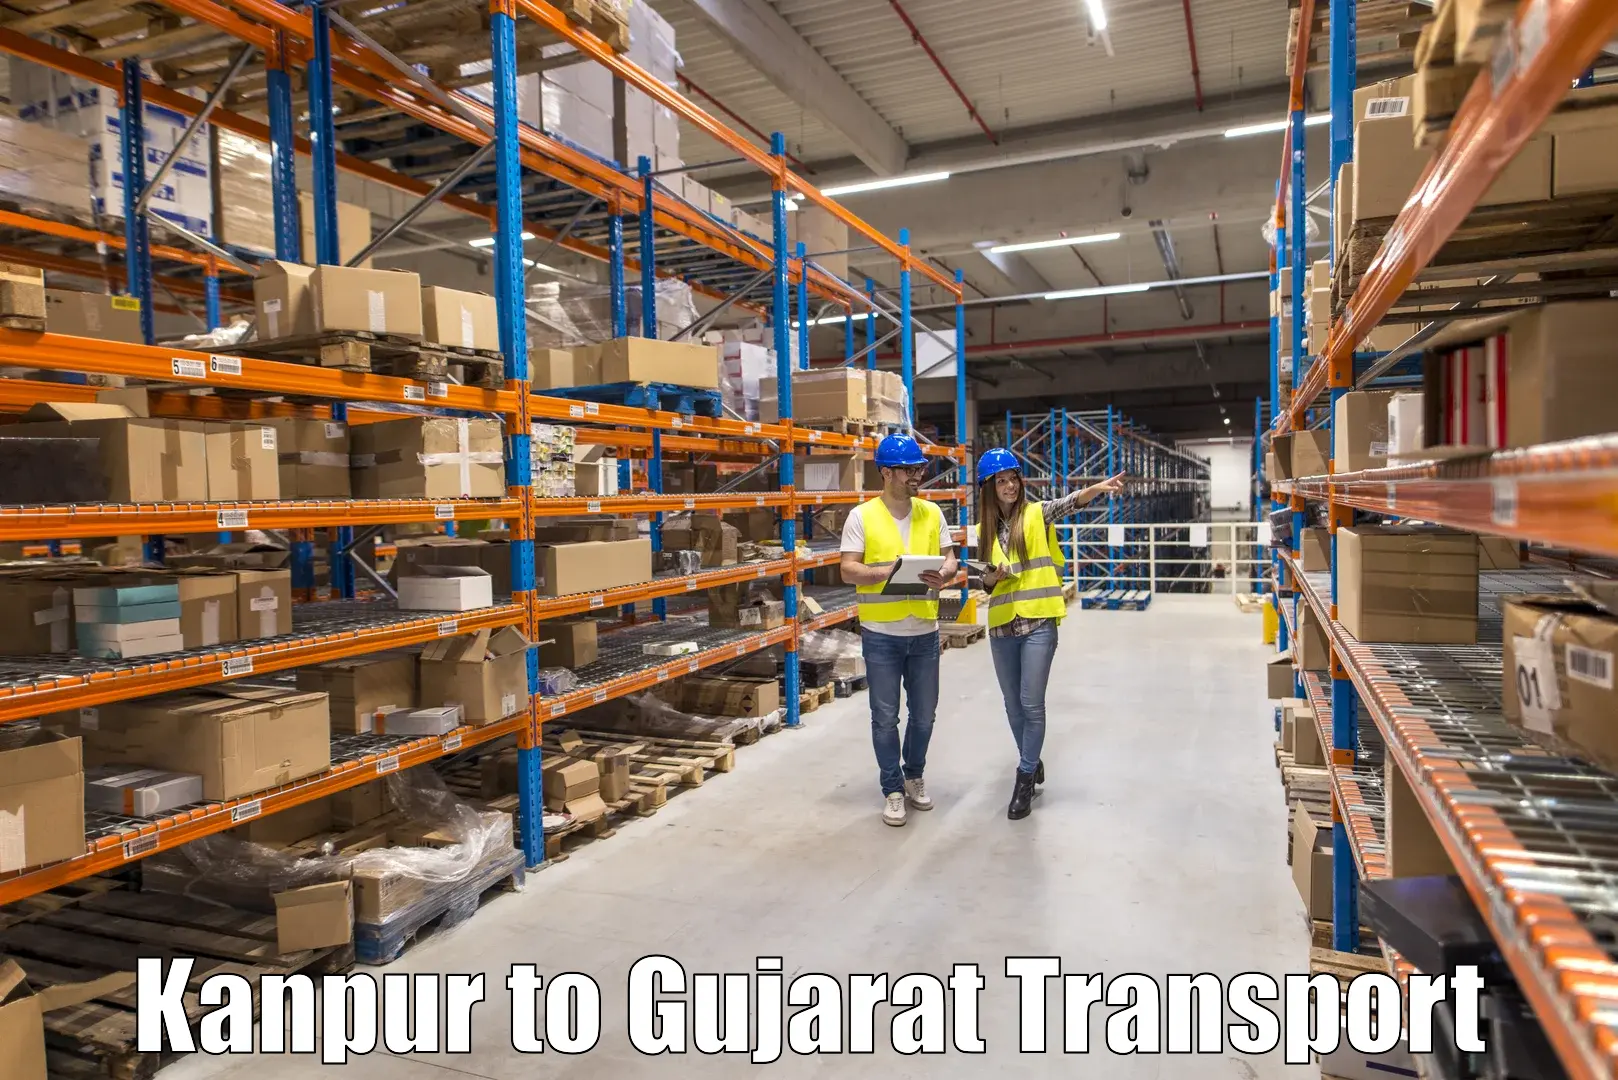 Daily transport service Kanpur to Gujarat